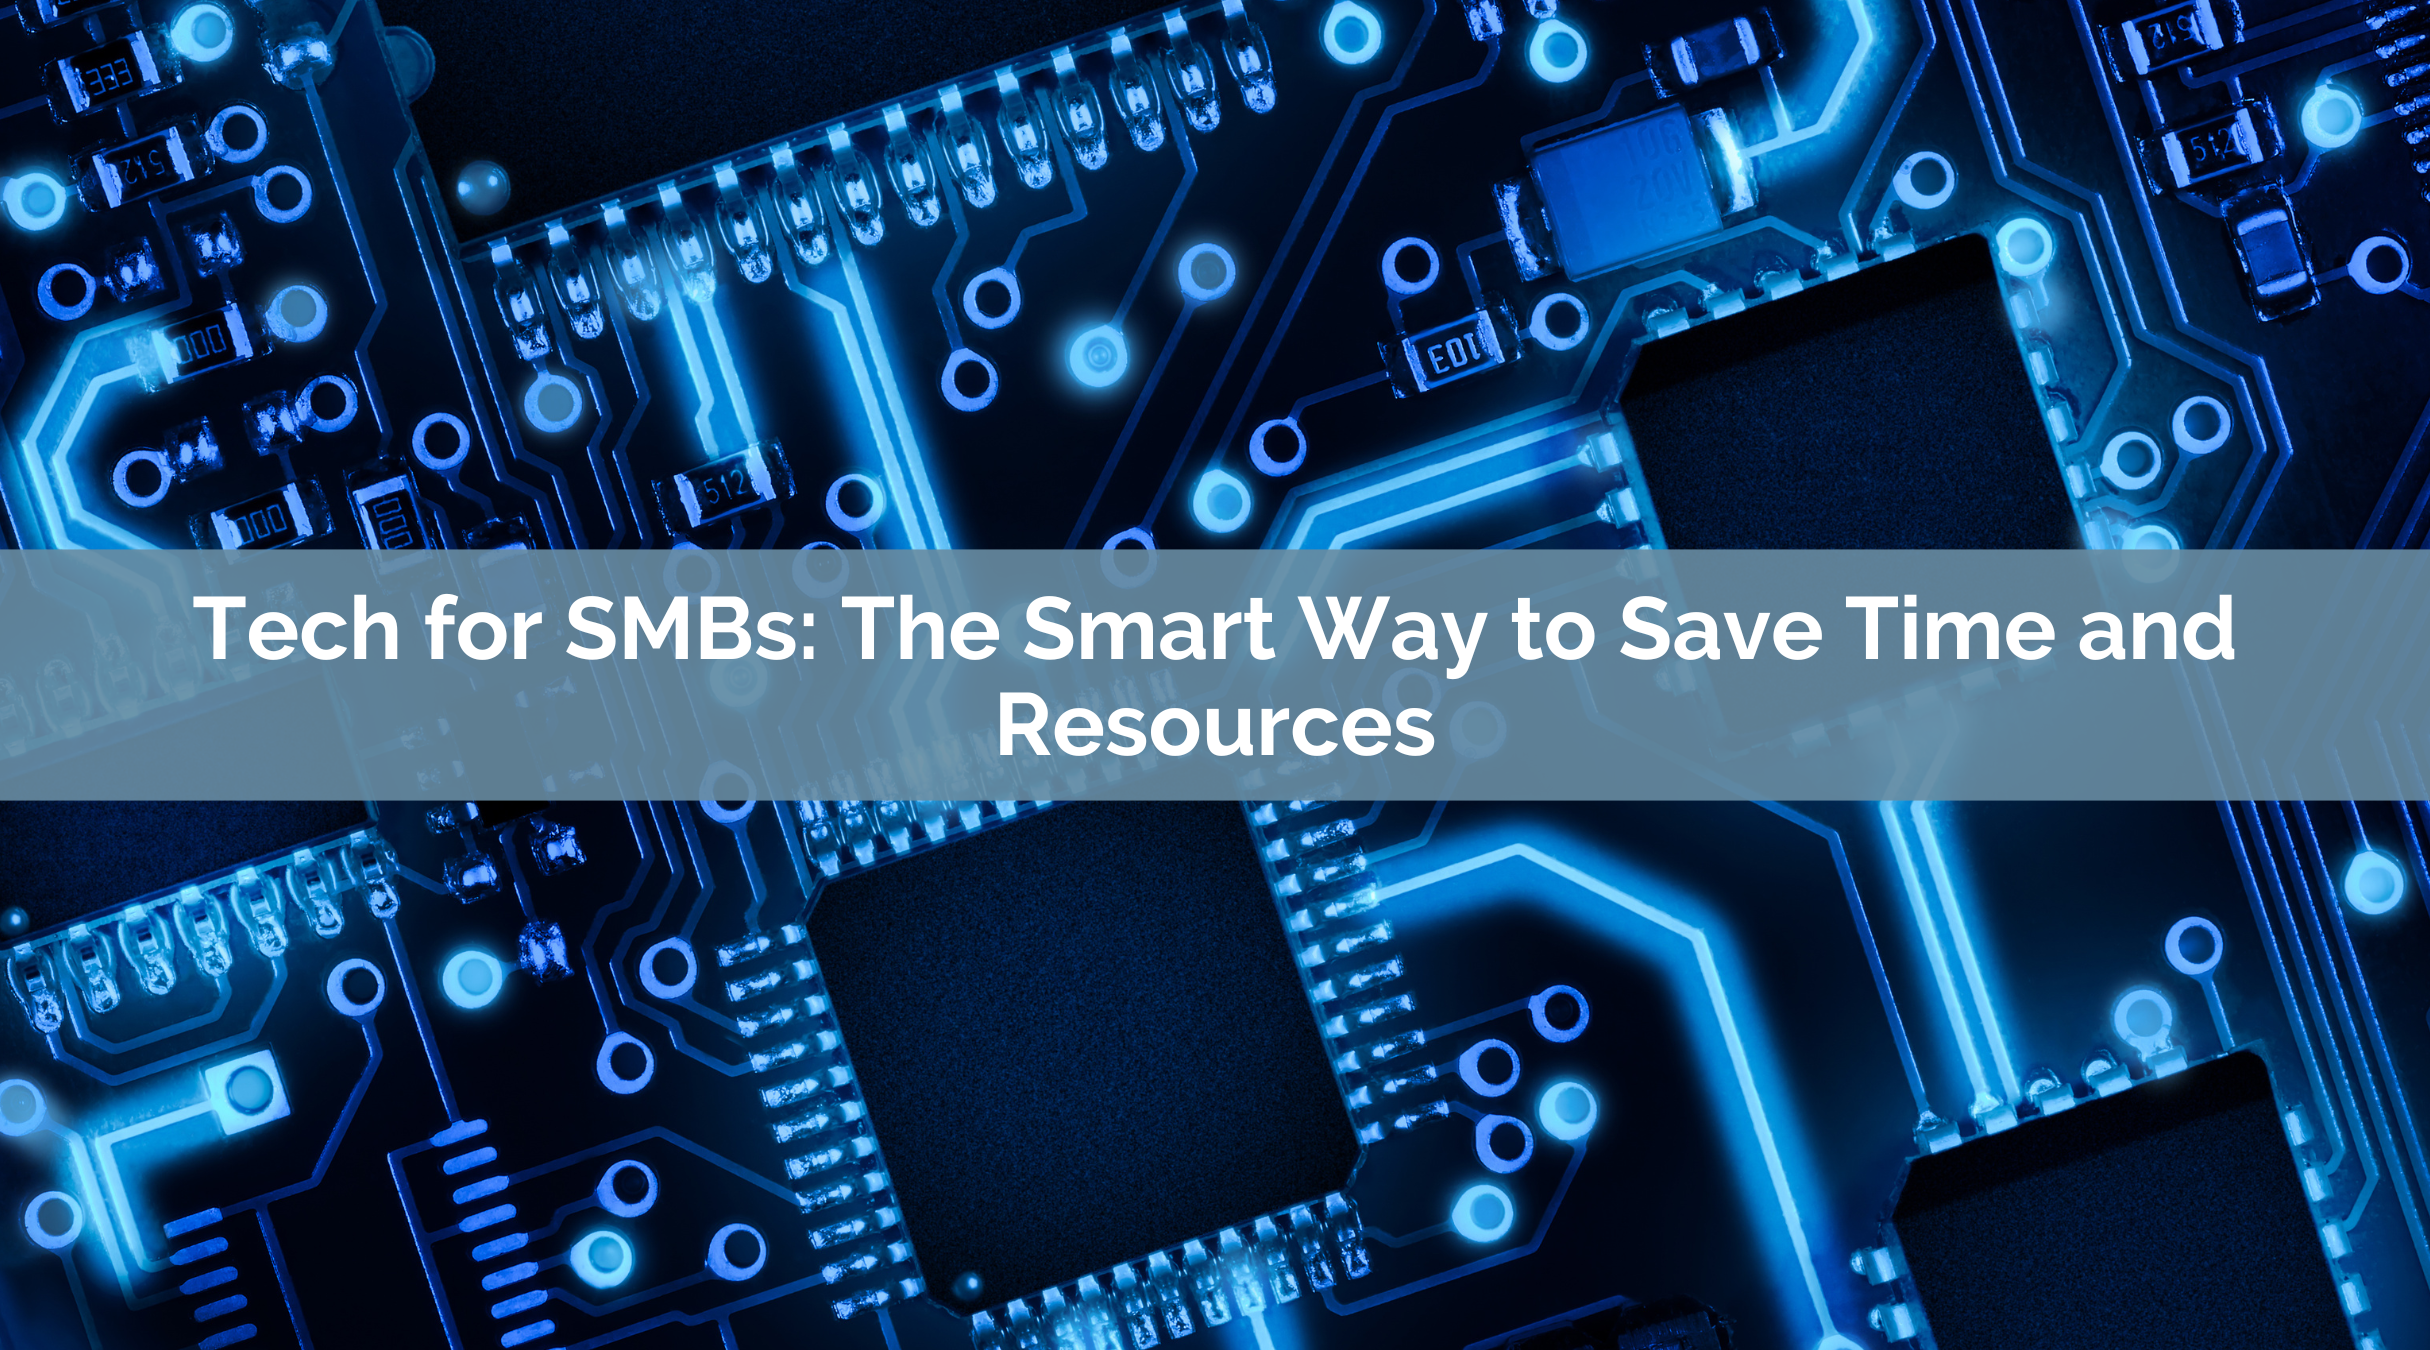 Tech for SMBs: The Smart Way to Save Time and Resources